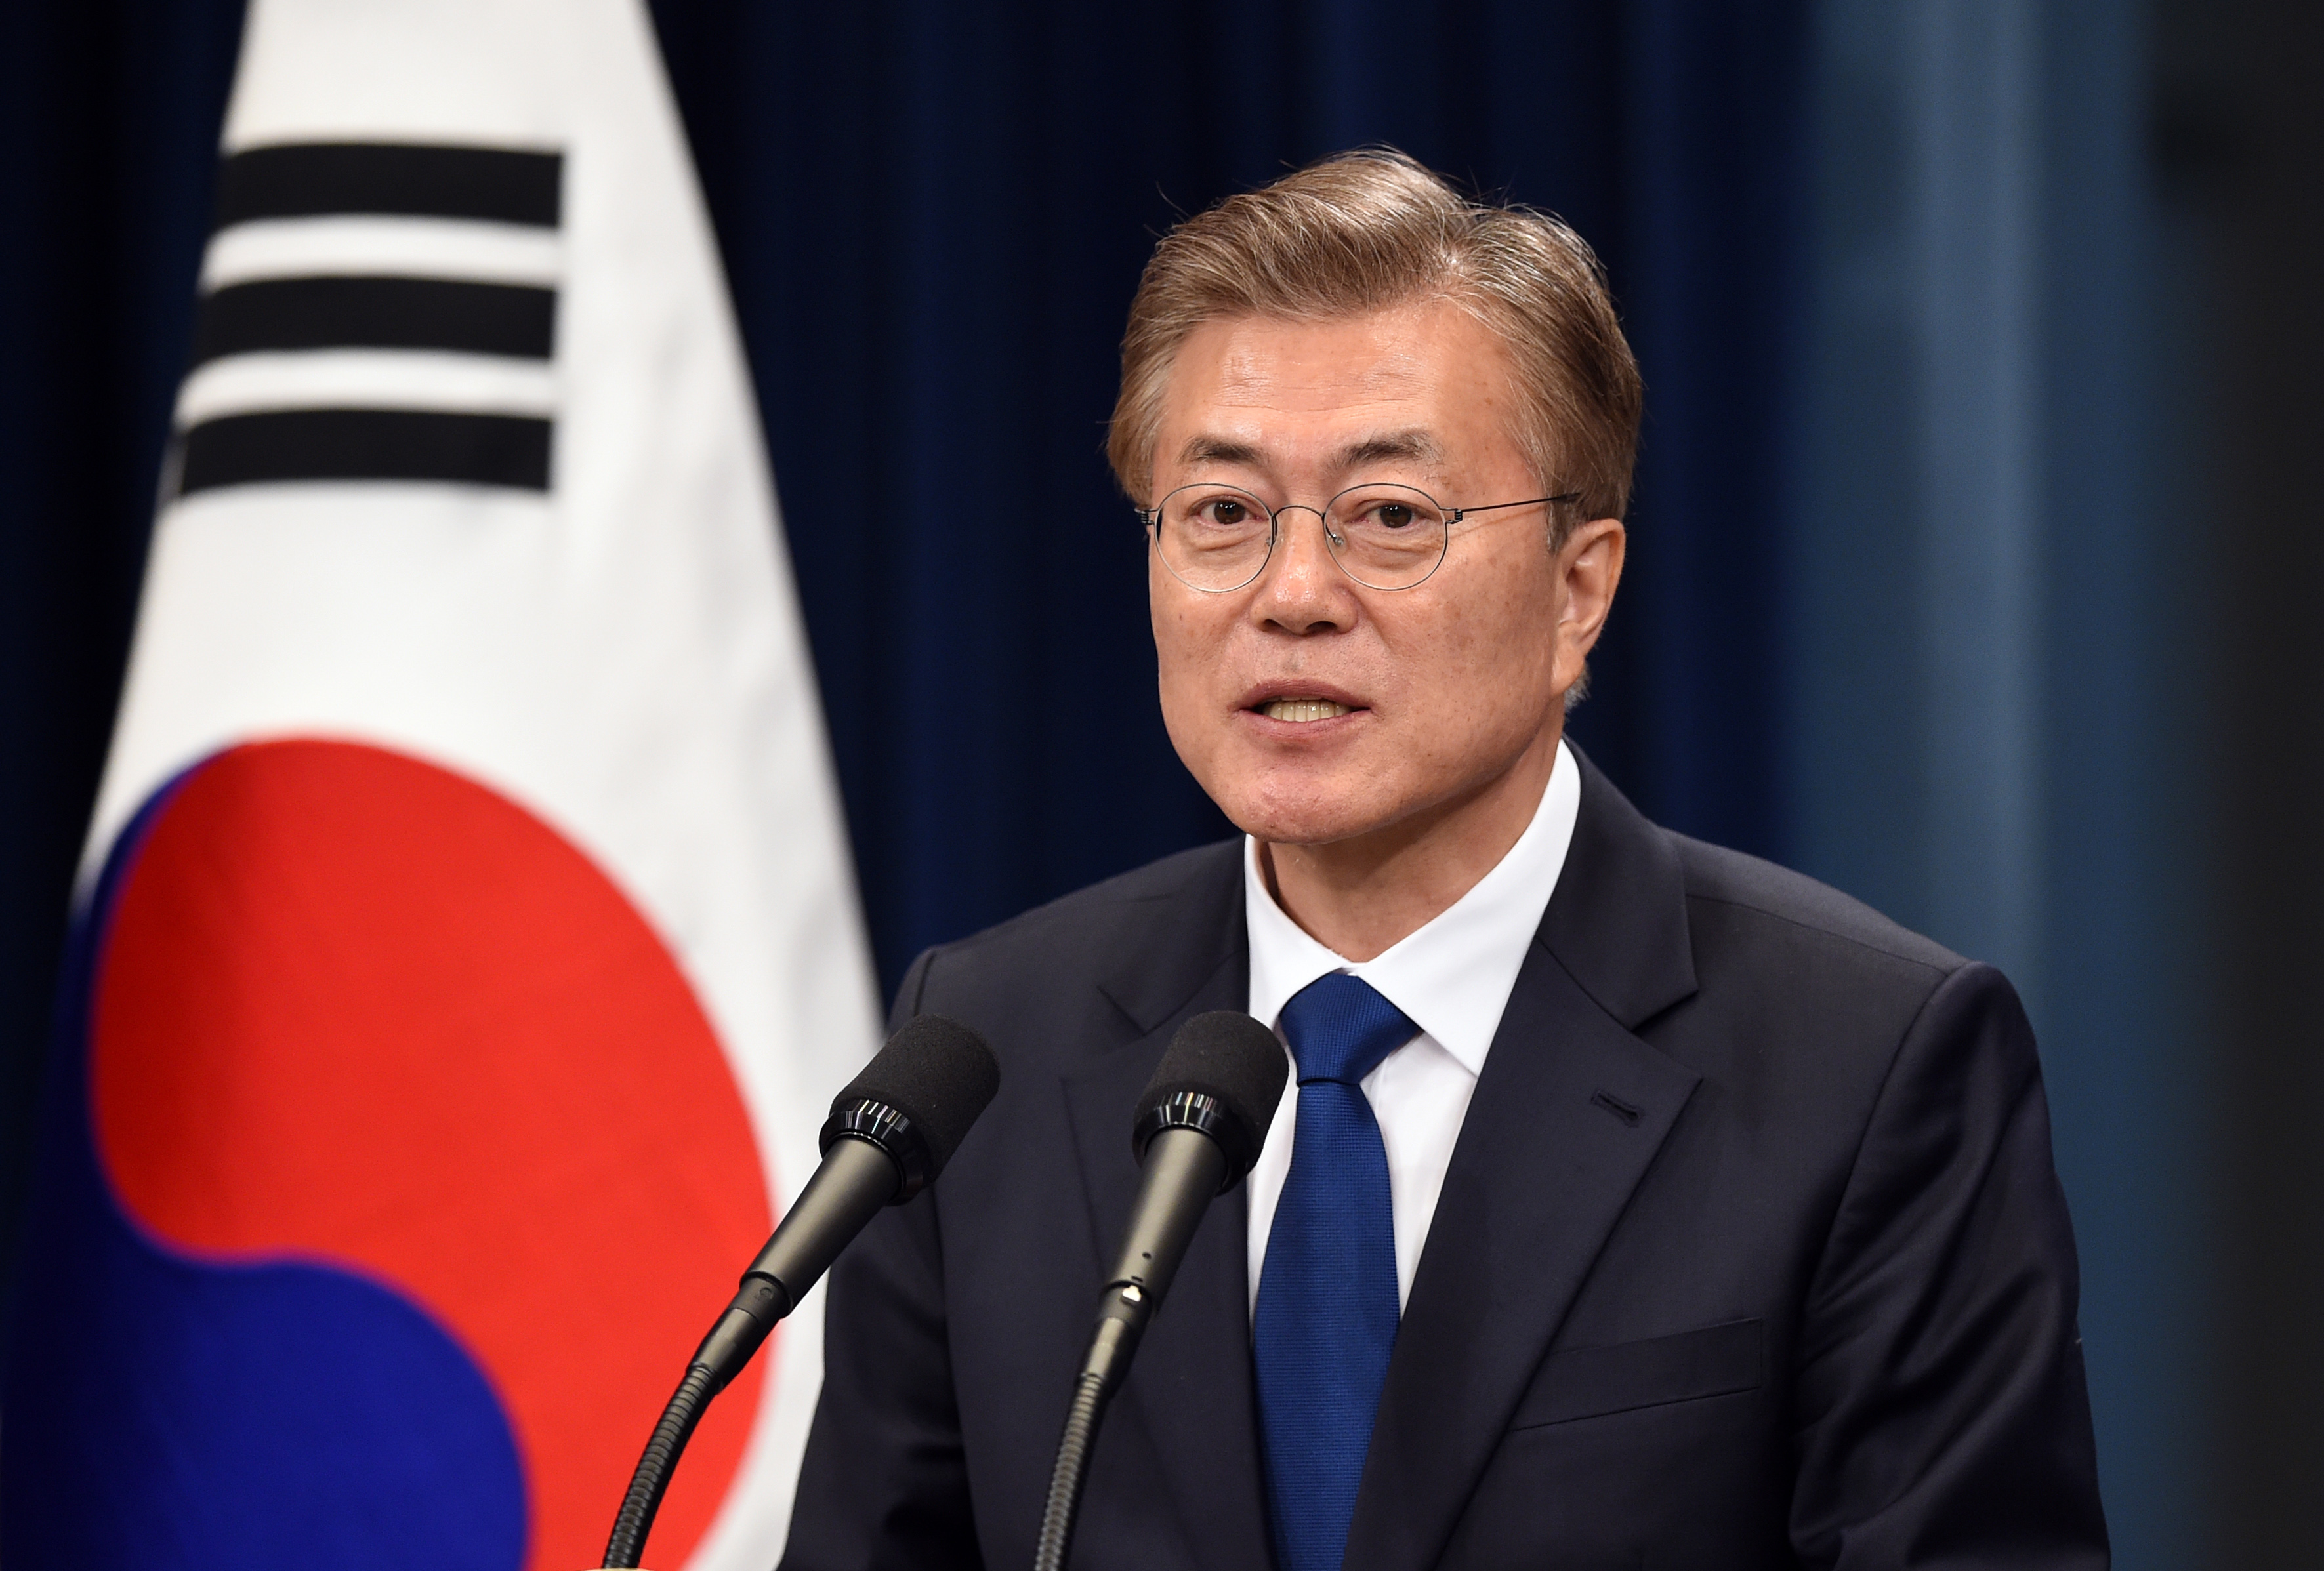 South Korea's President Reaffirms 12 GW of Offshore Wind by 2030 Goal